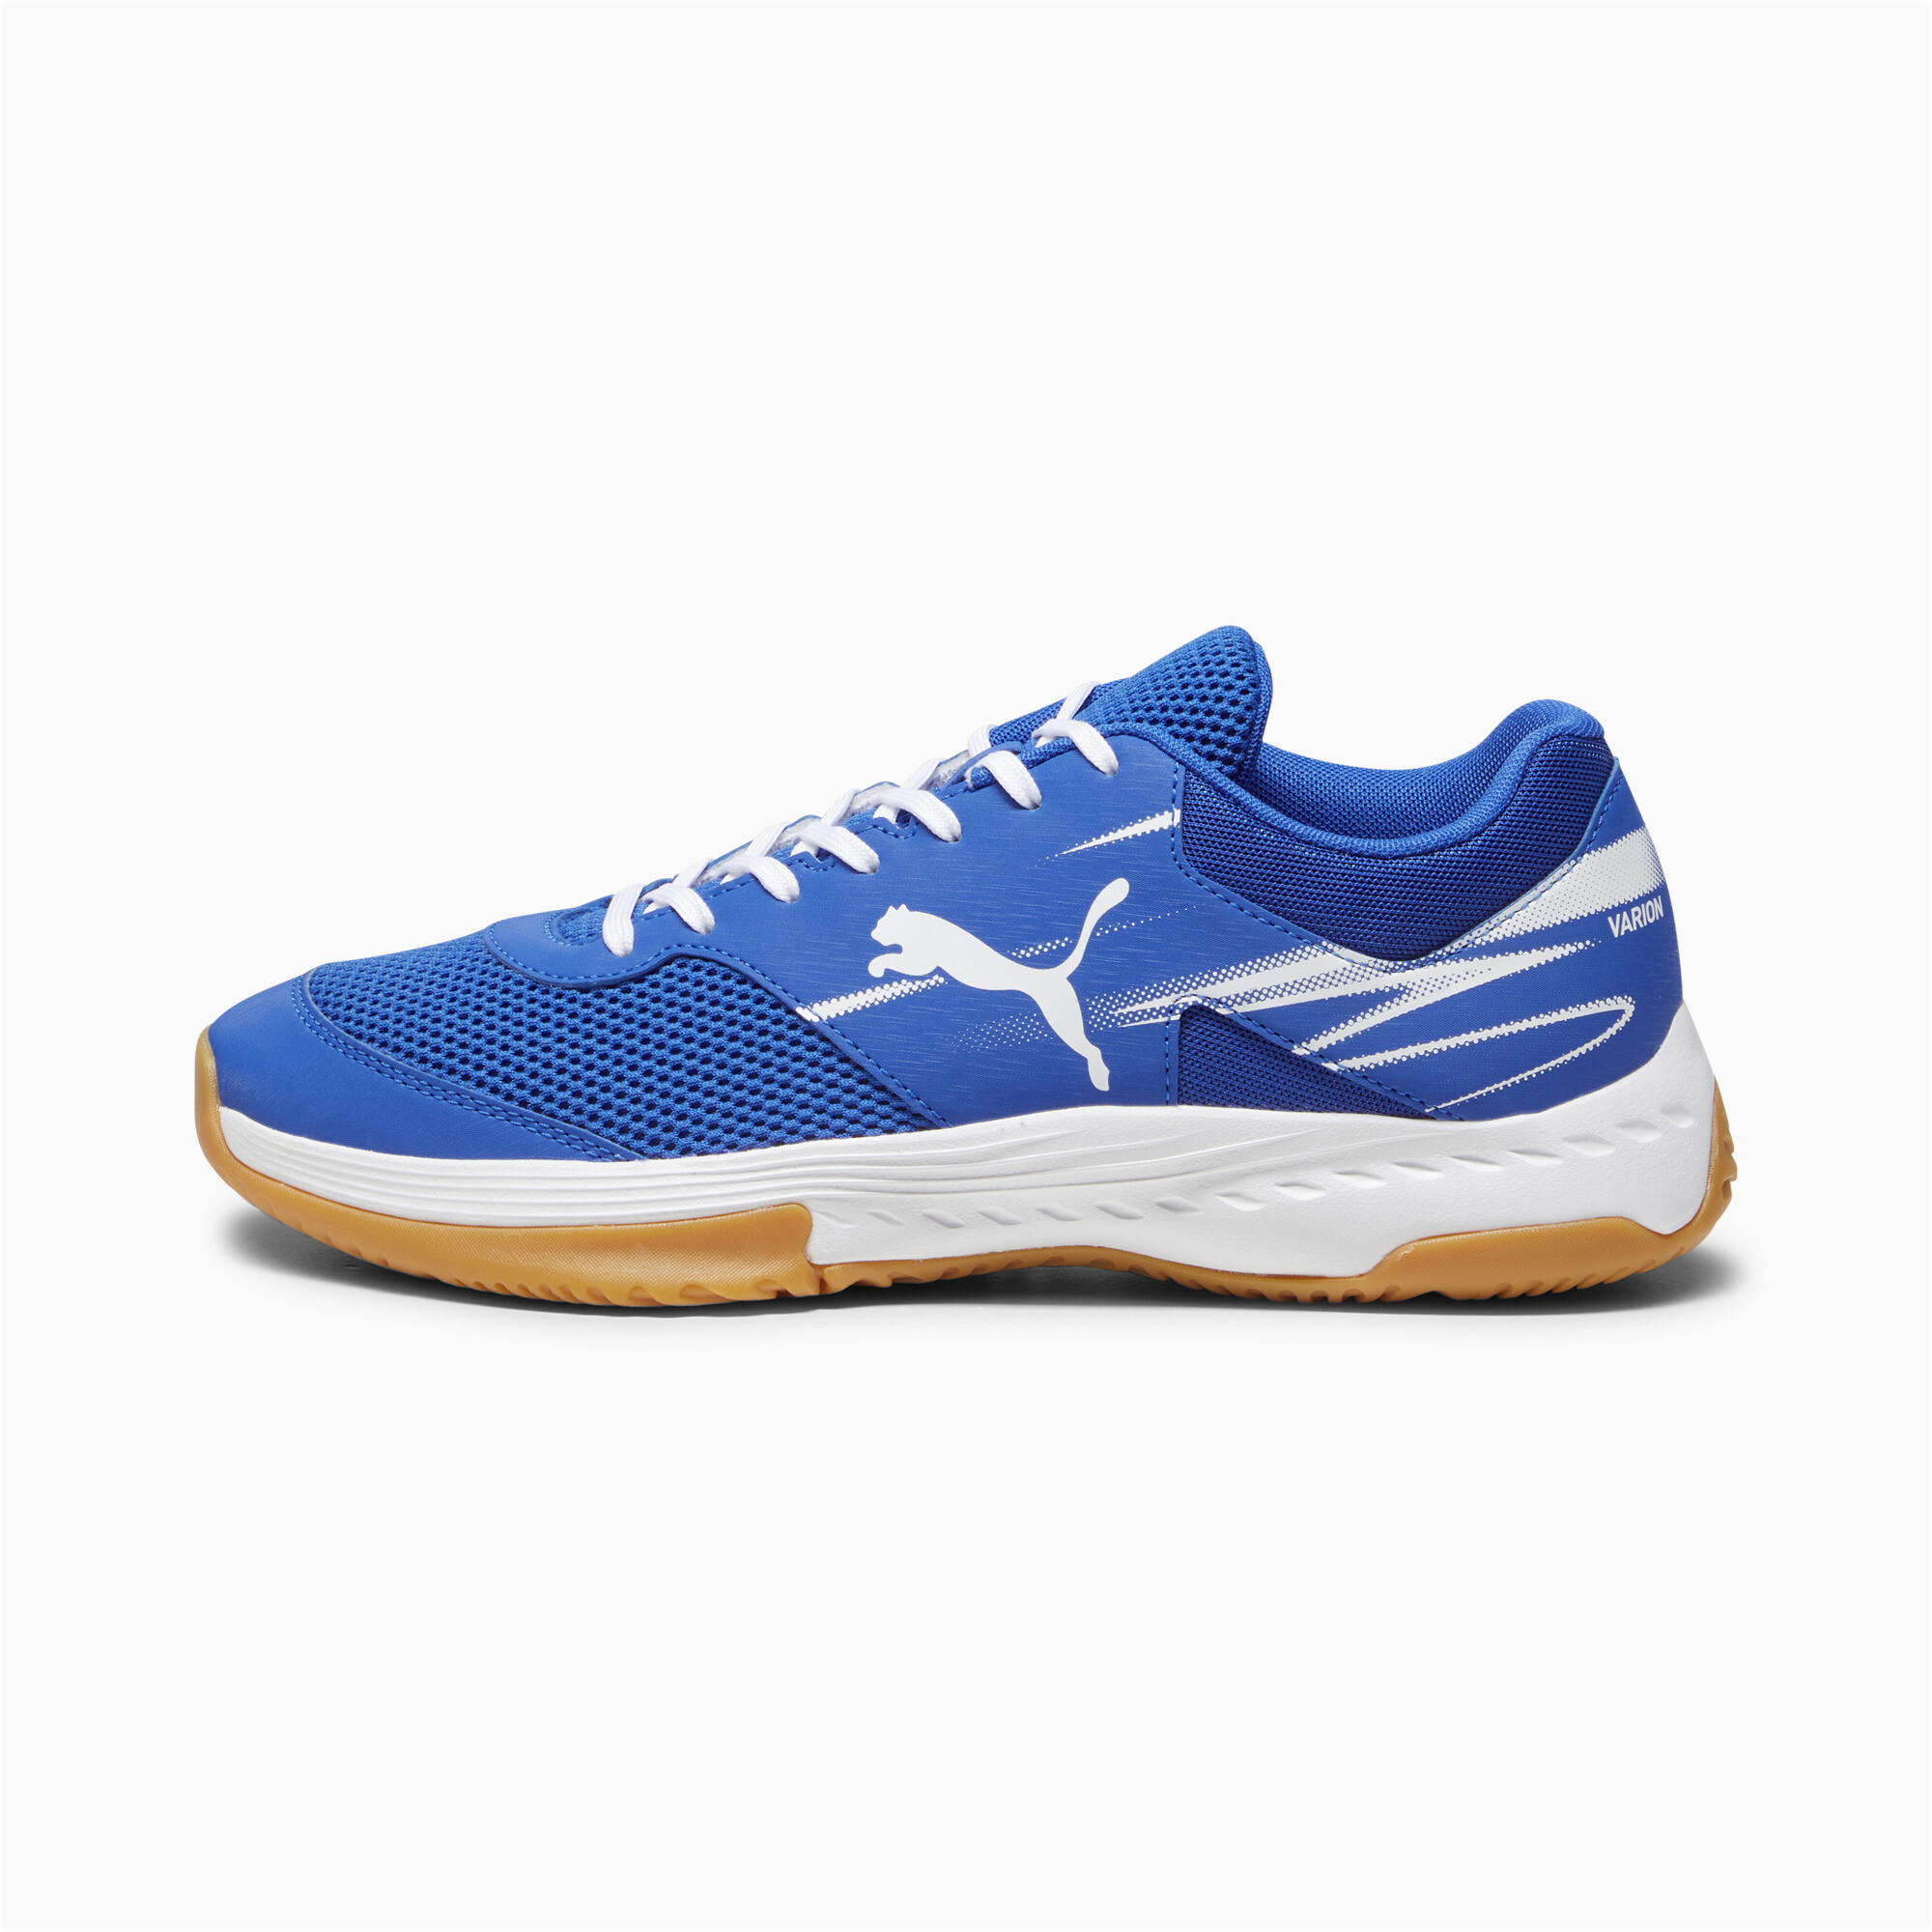 Puma Varion II Indoor Sports Shoes, Blue, Size 38, Shoes